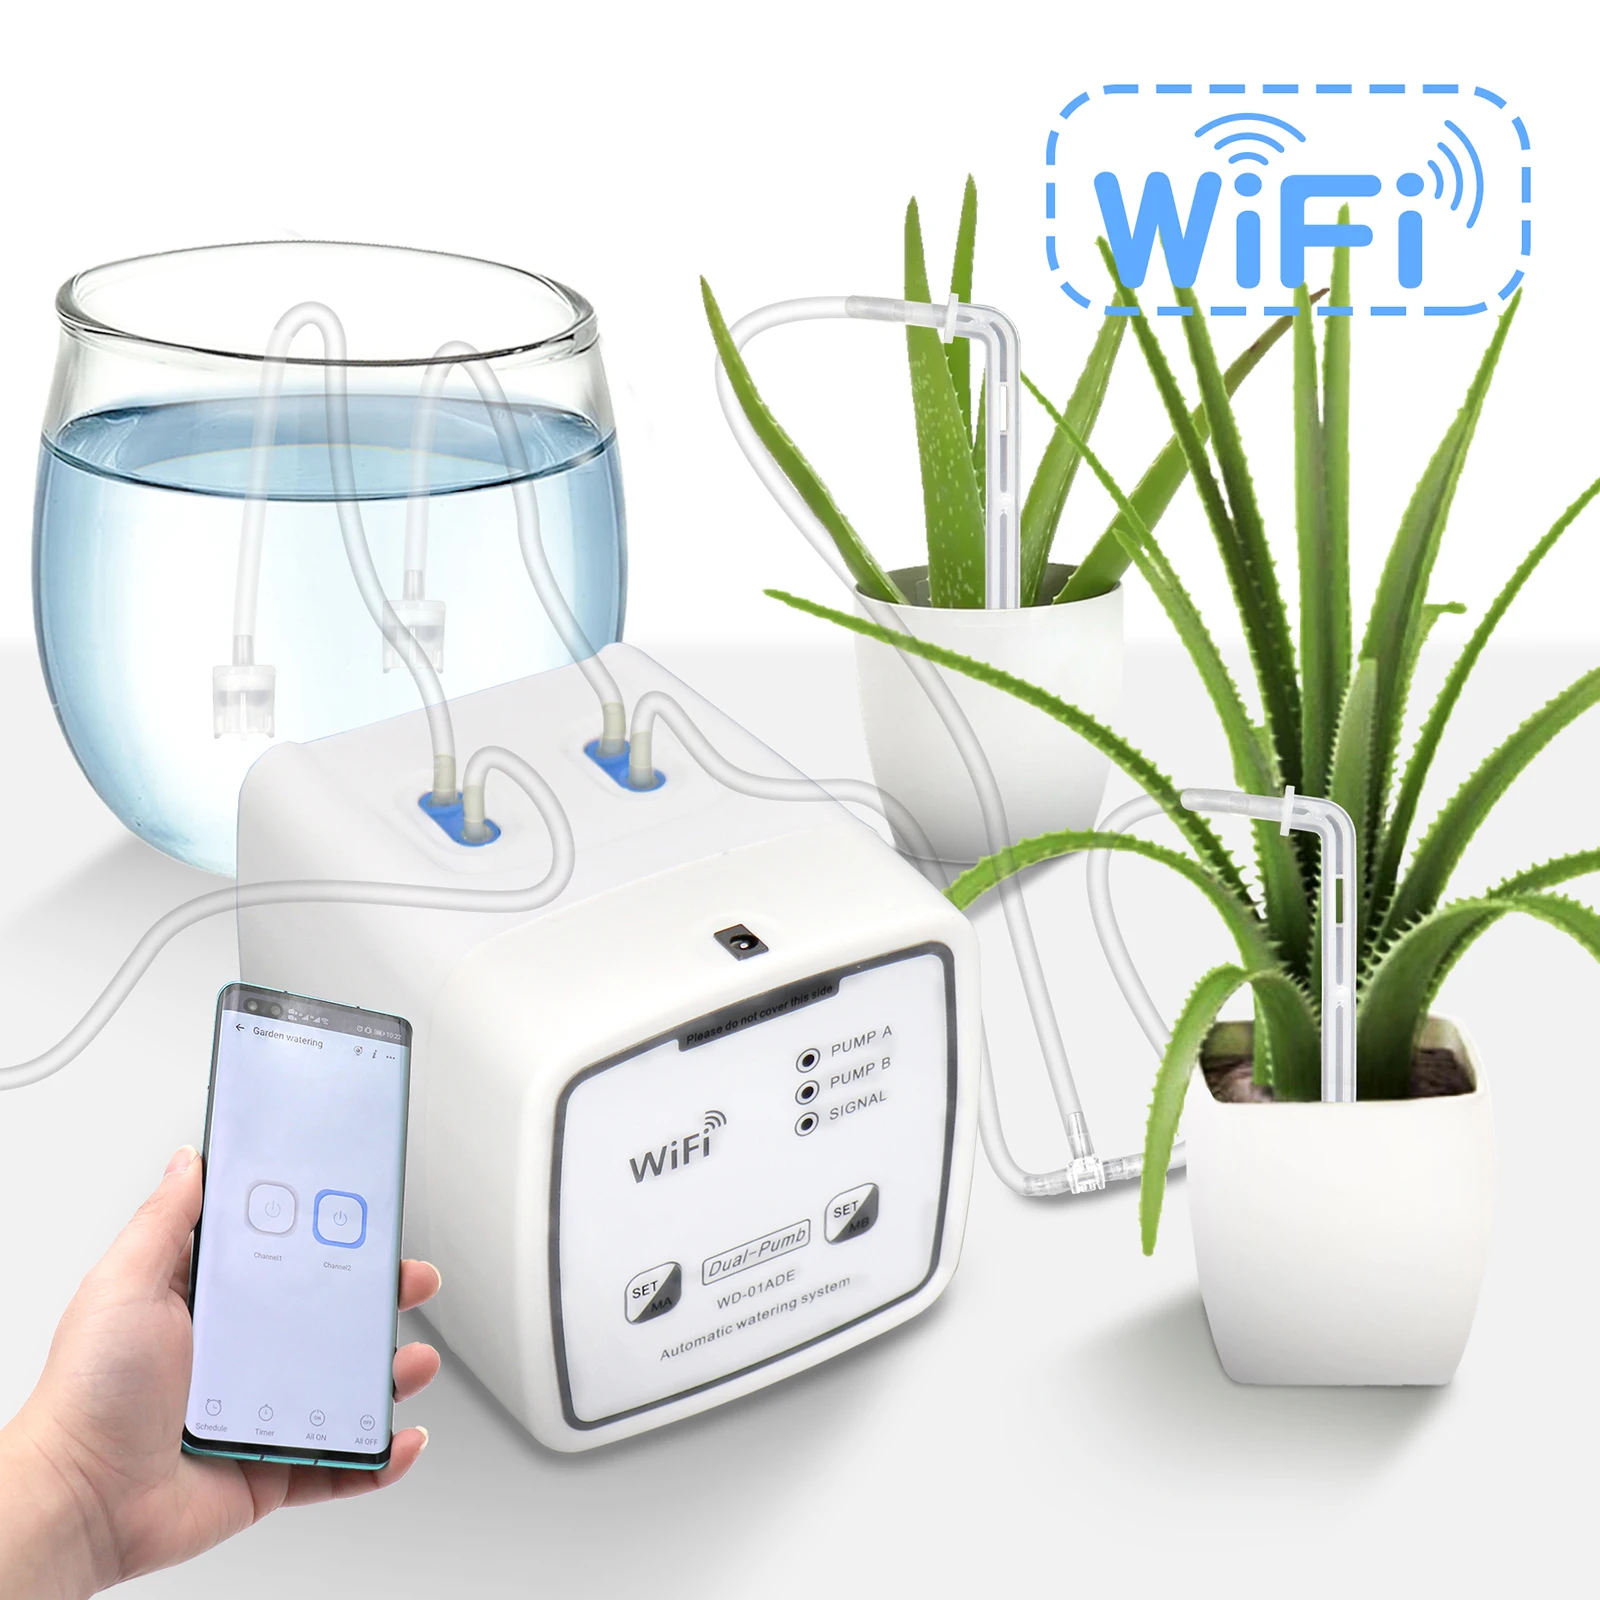 Double Pump Garden Wifi Control Watering Device Automatic Water Drip Irrigation Watering System Kit WIFI Mobile APP Control